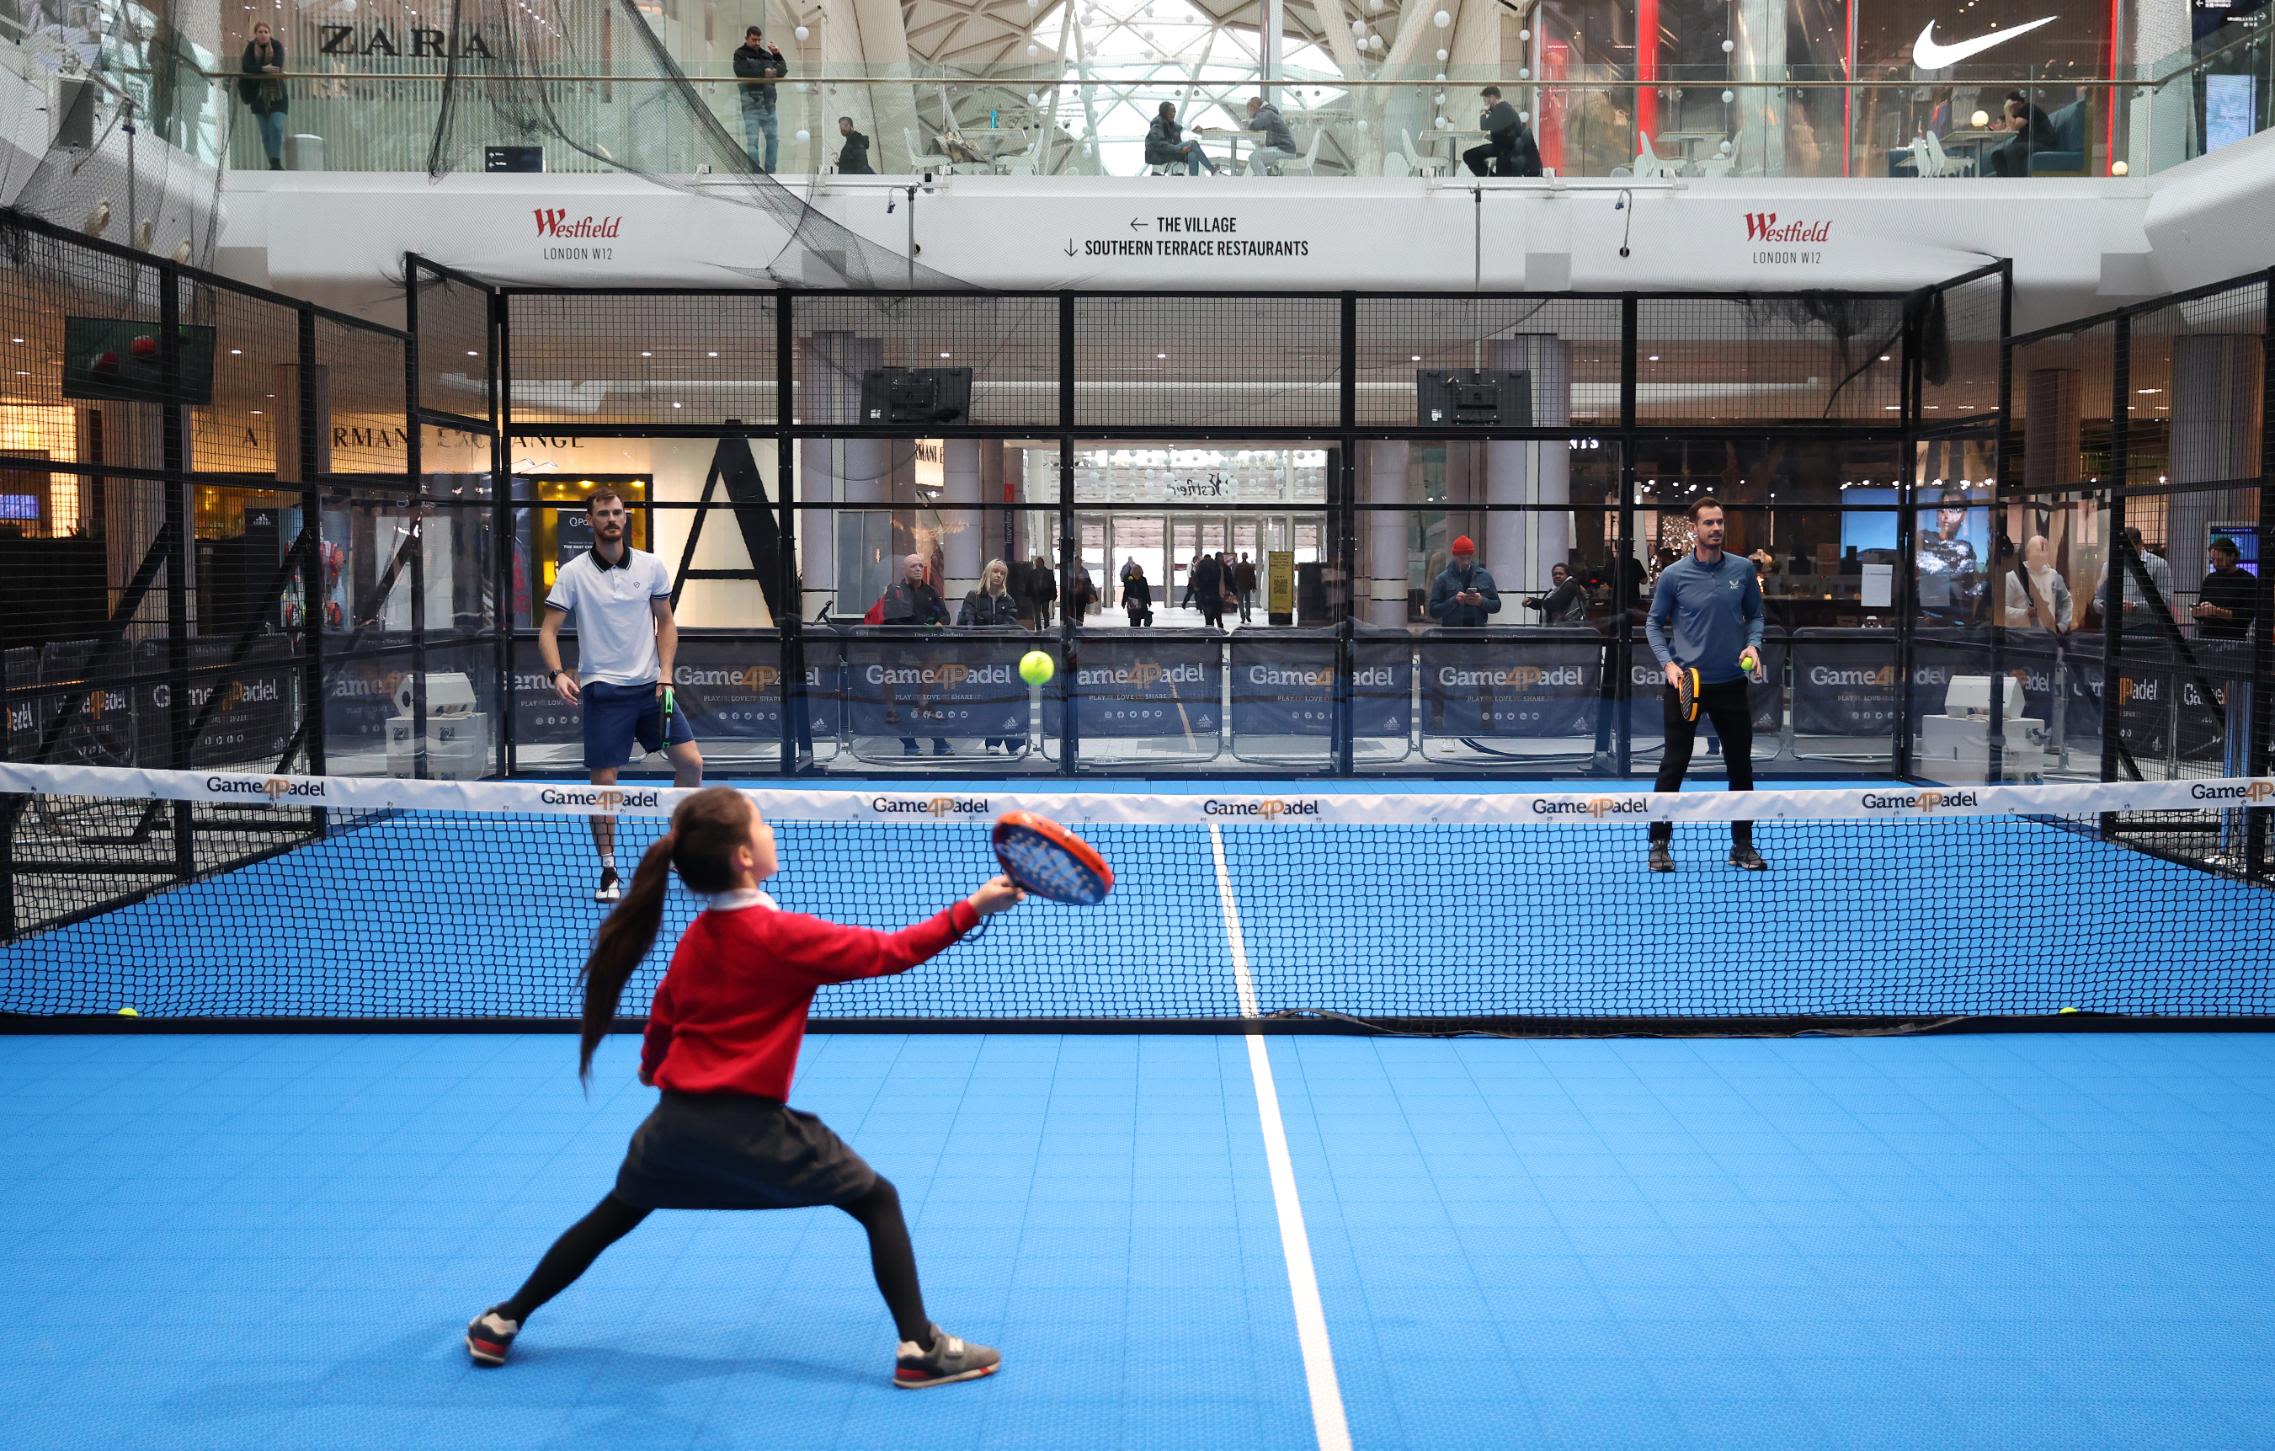 With 25 million players worldwide, padel is only tipped to get 'bigger and  bigger' by tennis star Andy Murray